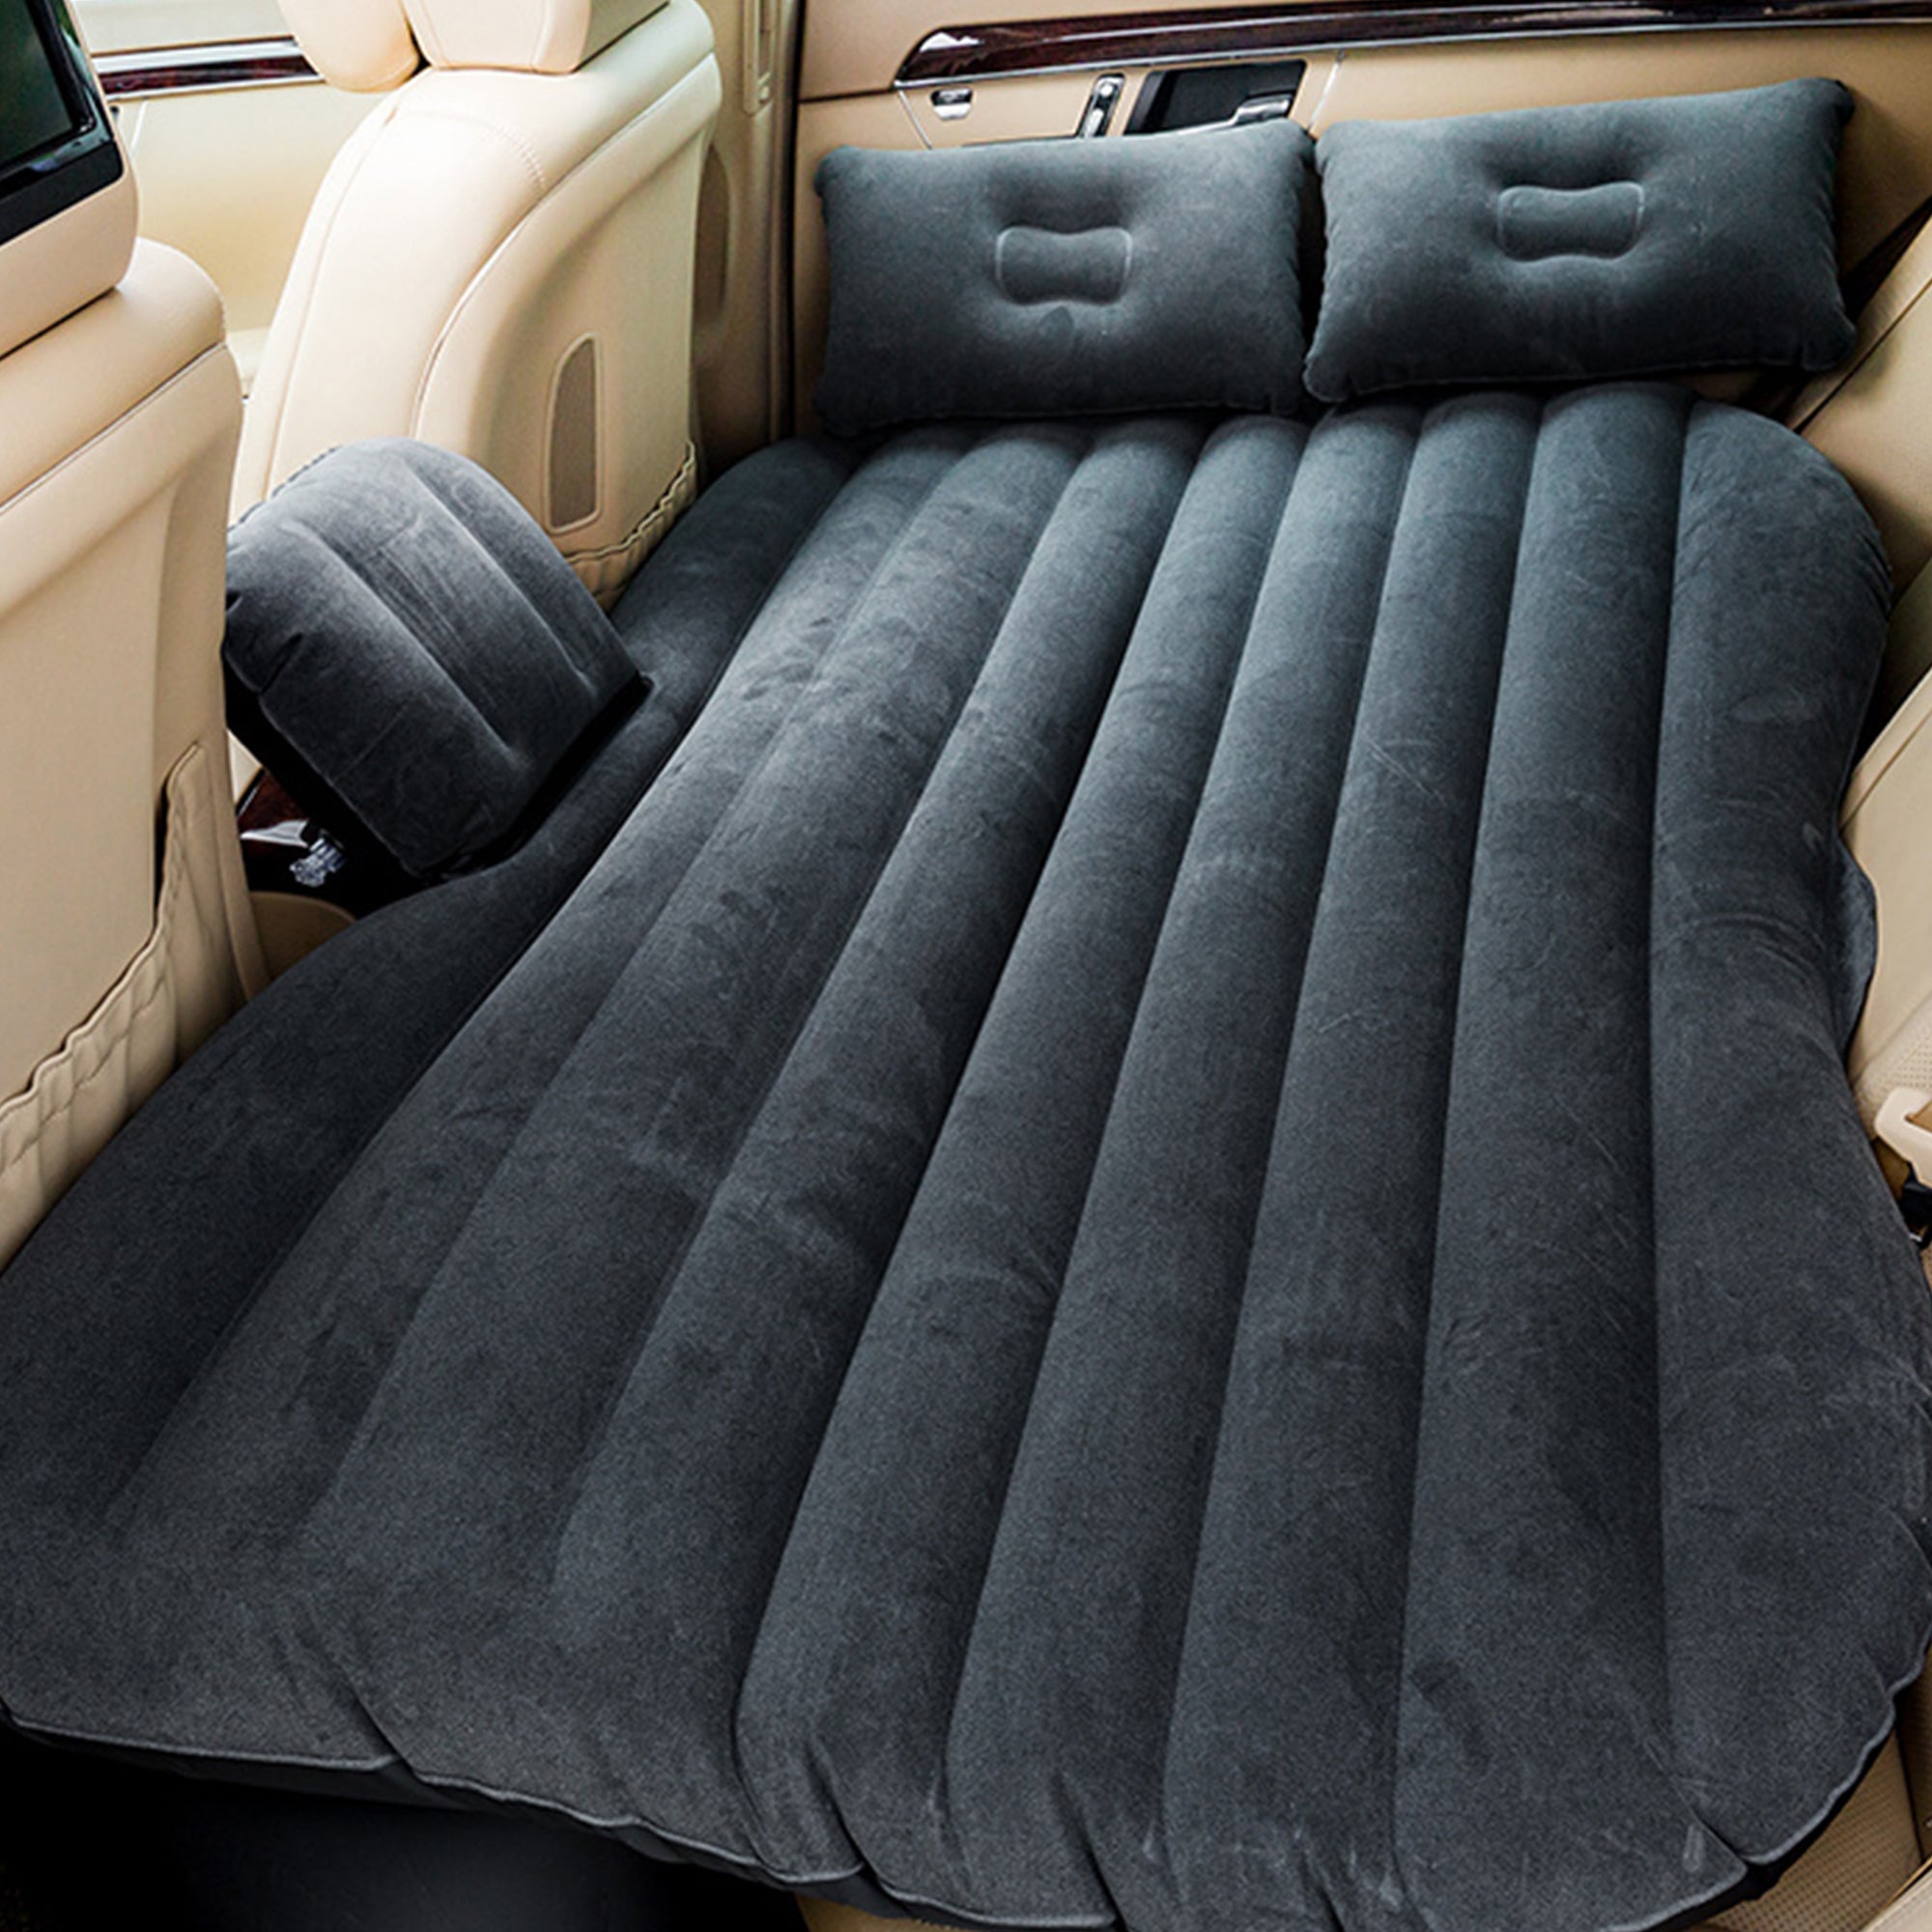 Inflatable Car Back Seat Mattress Protable Travel Camping Air Bed Rest Sleeping Buy Hand Tools